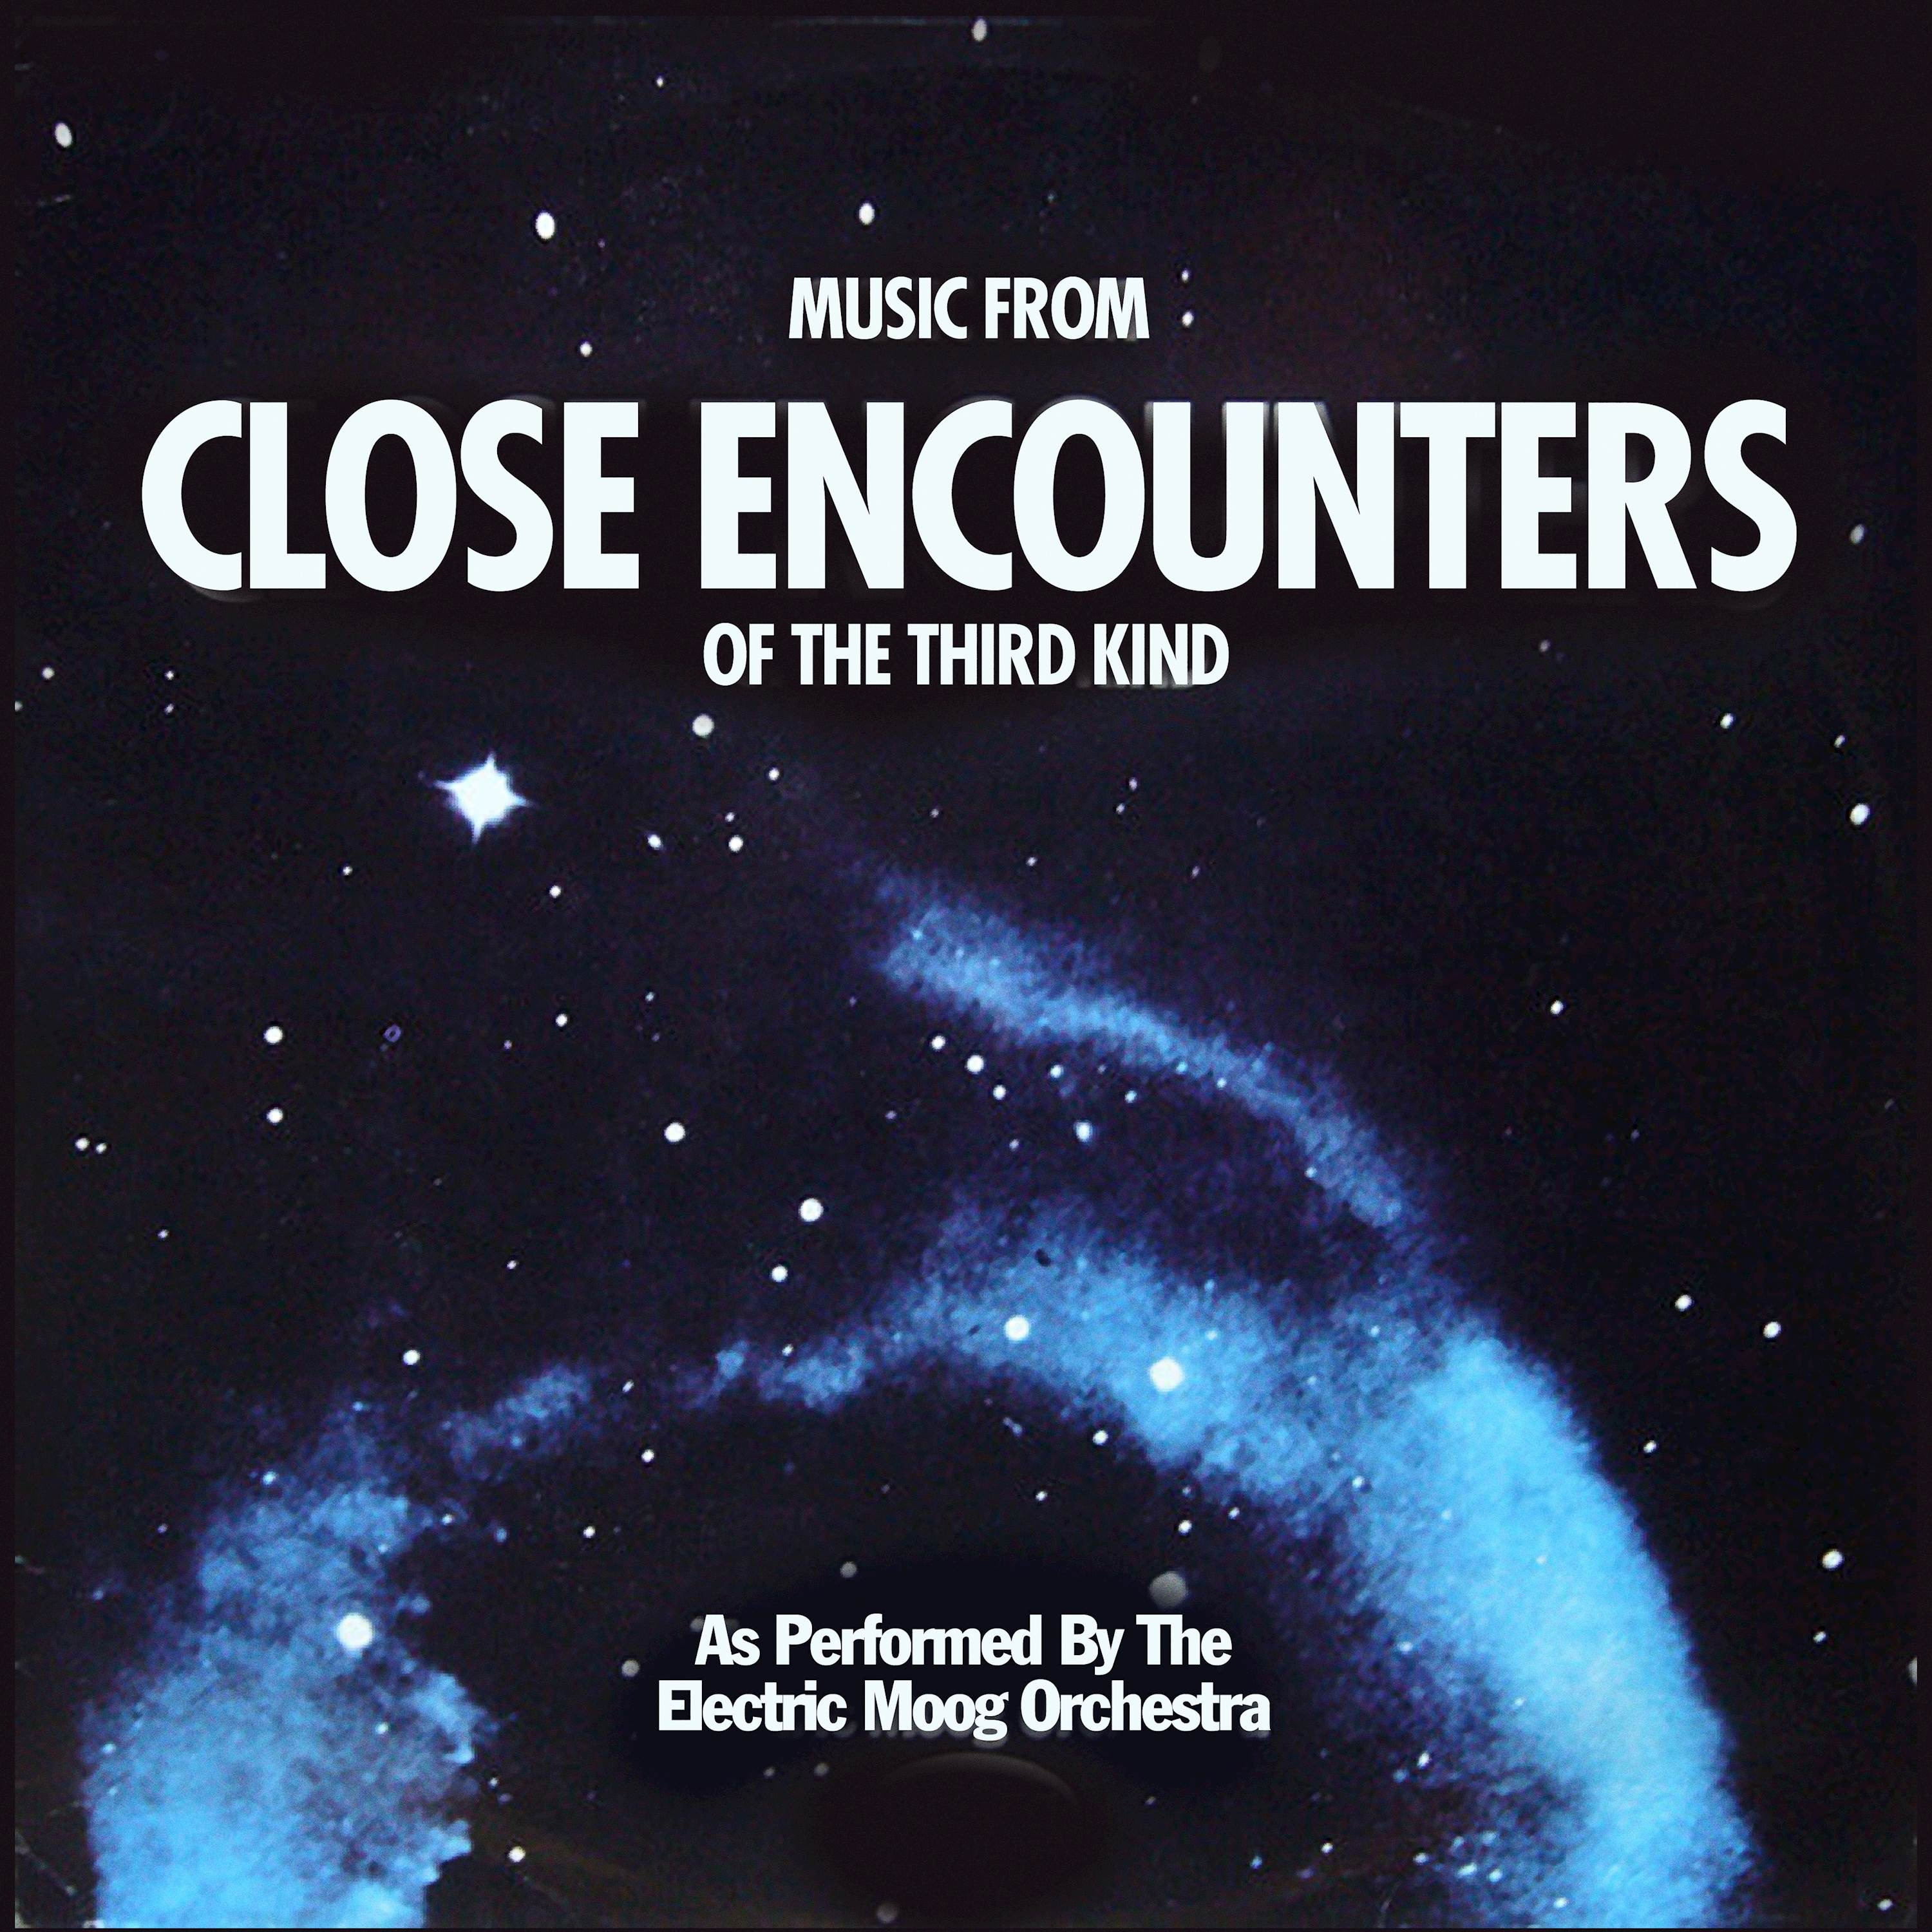 Close encounters of the third kind. Close encounters. Third kind records. Galaxy Orchestra. Closer music